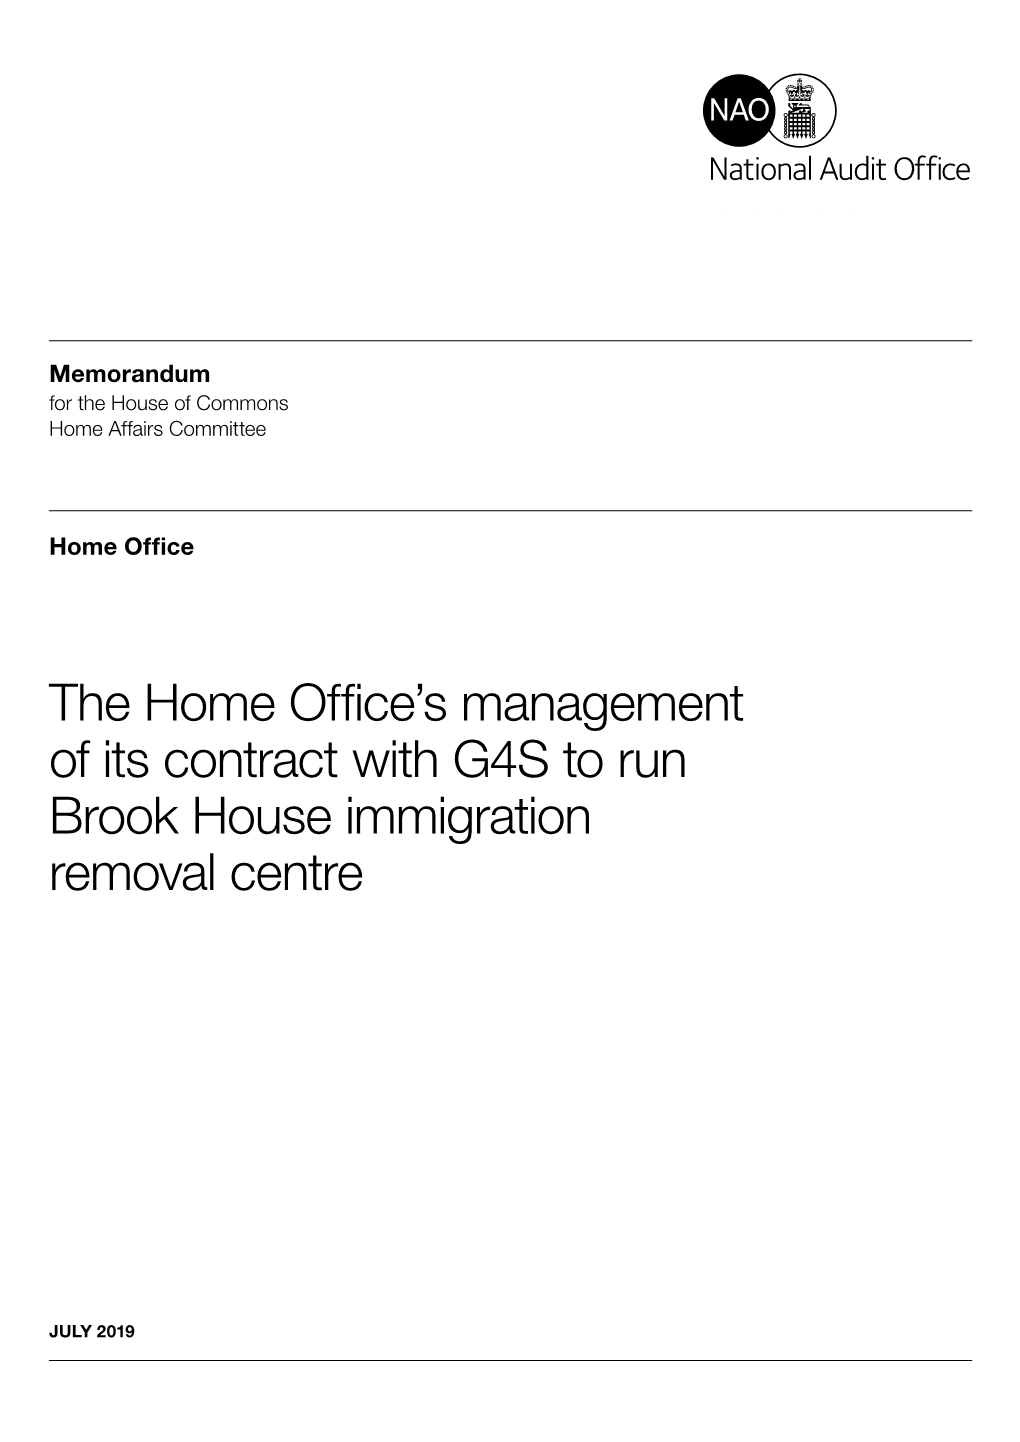 The Home Office's Management of Its Contract With